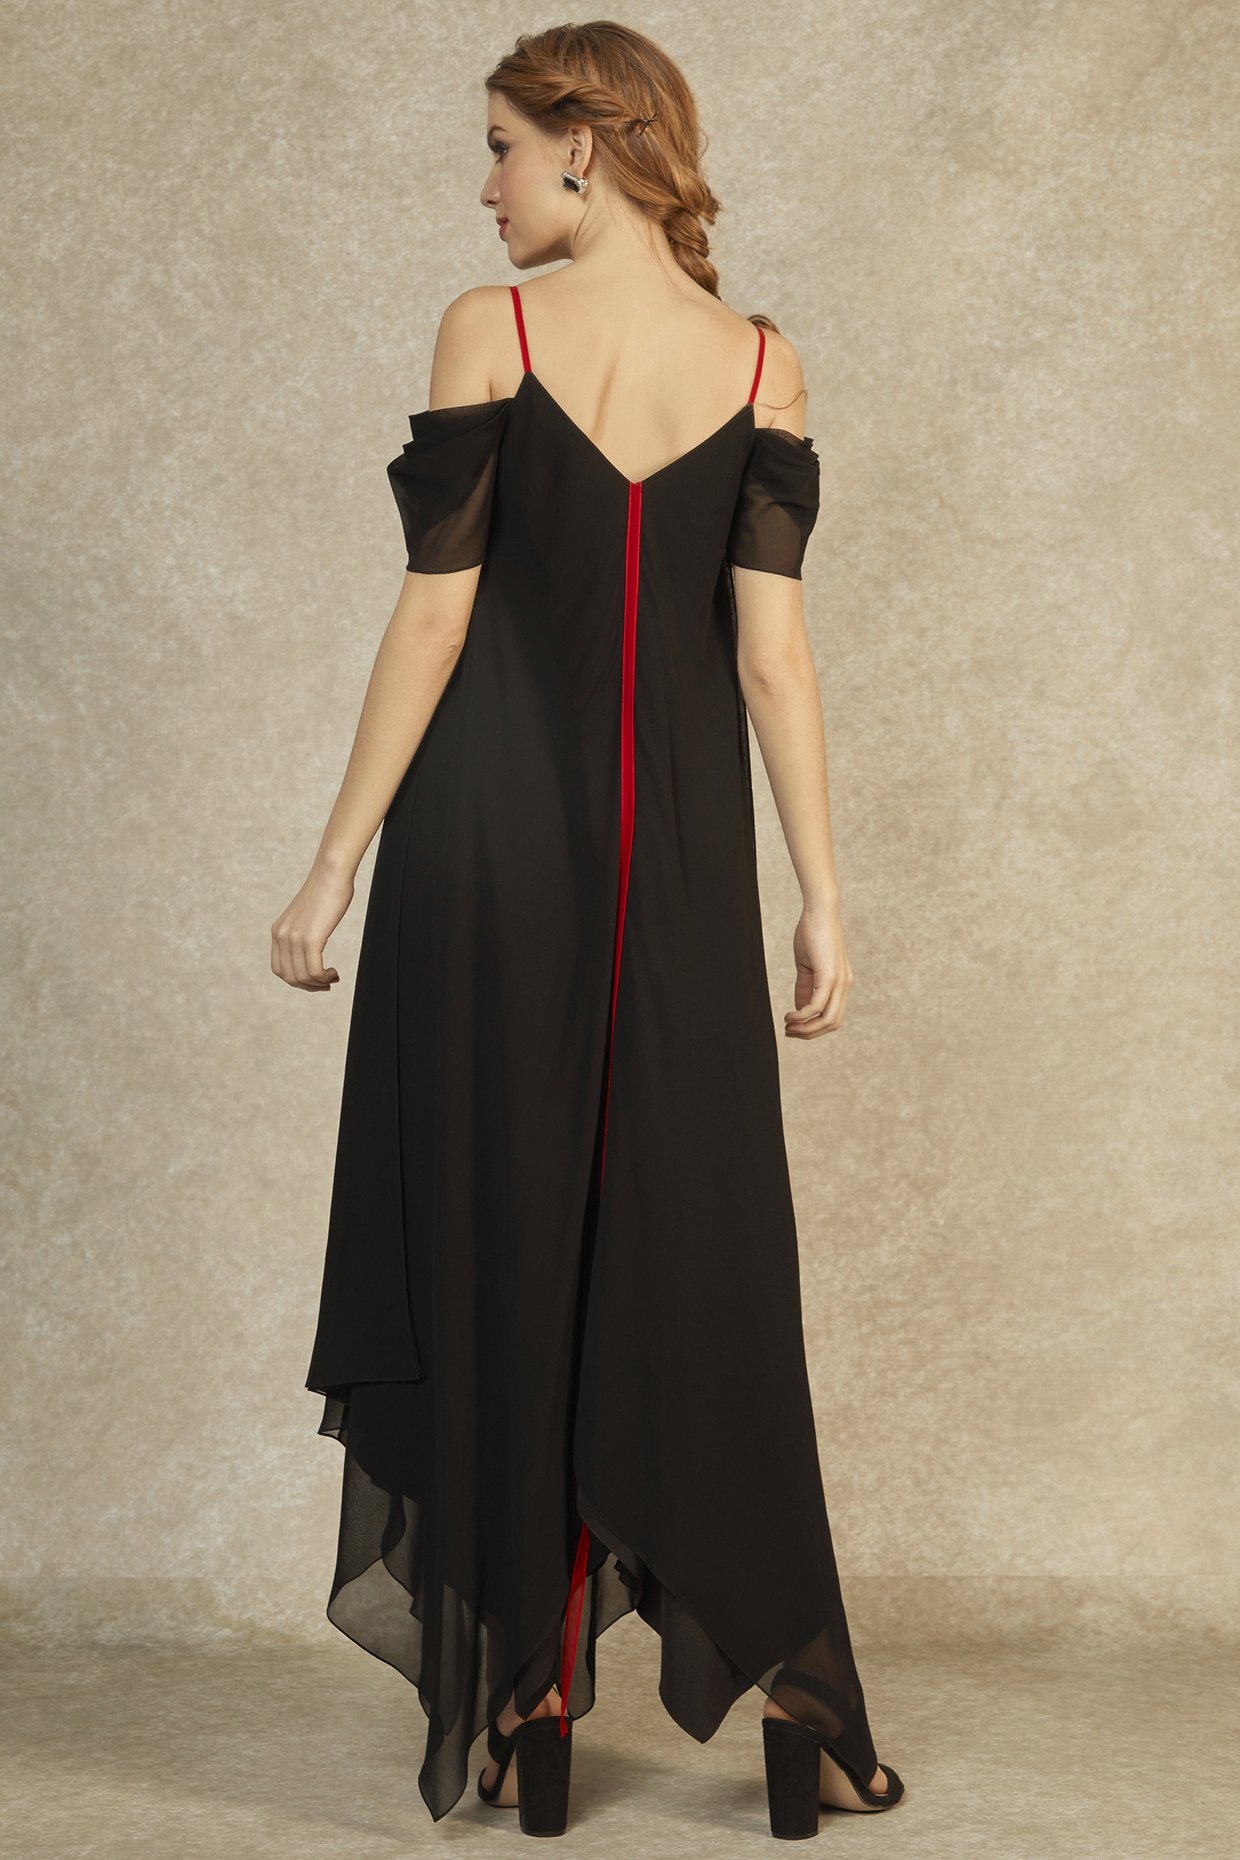 Gown  Black net red thread embroidered gown